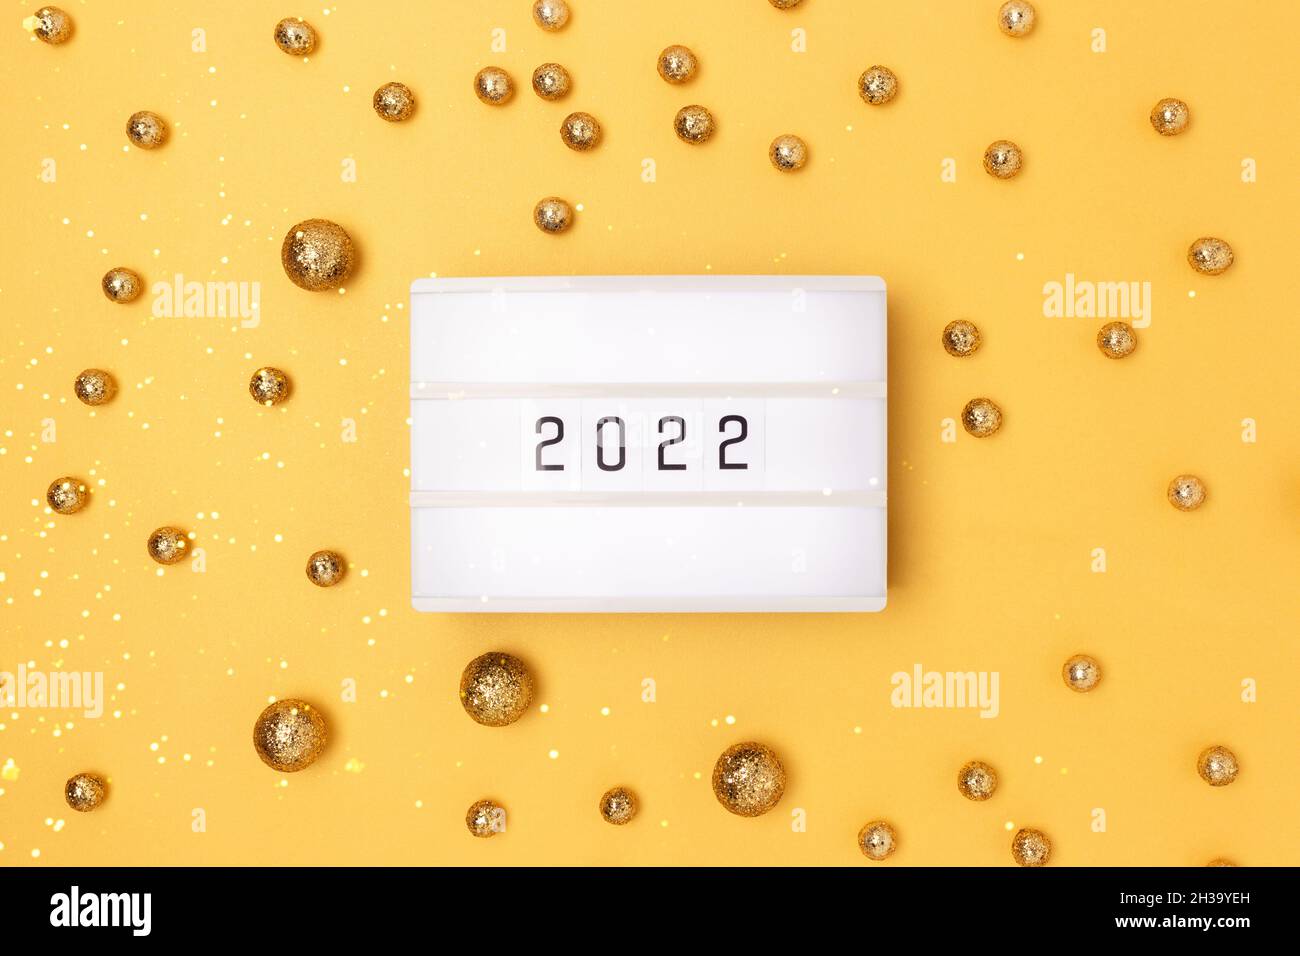 Lightbox with 2022 numbers on a golden background with round confetti. Stock Photo